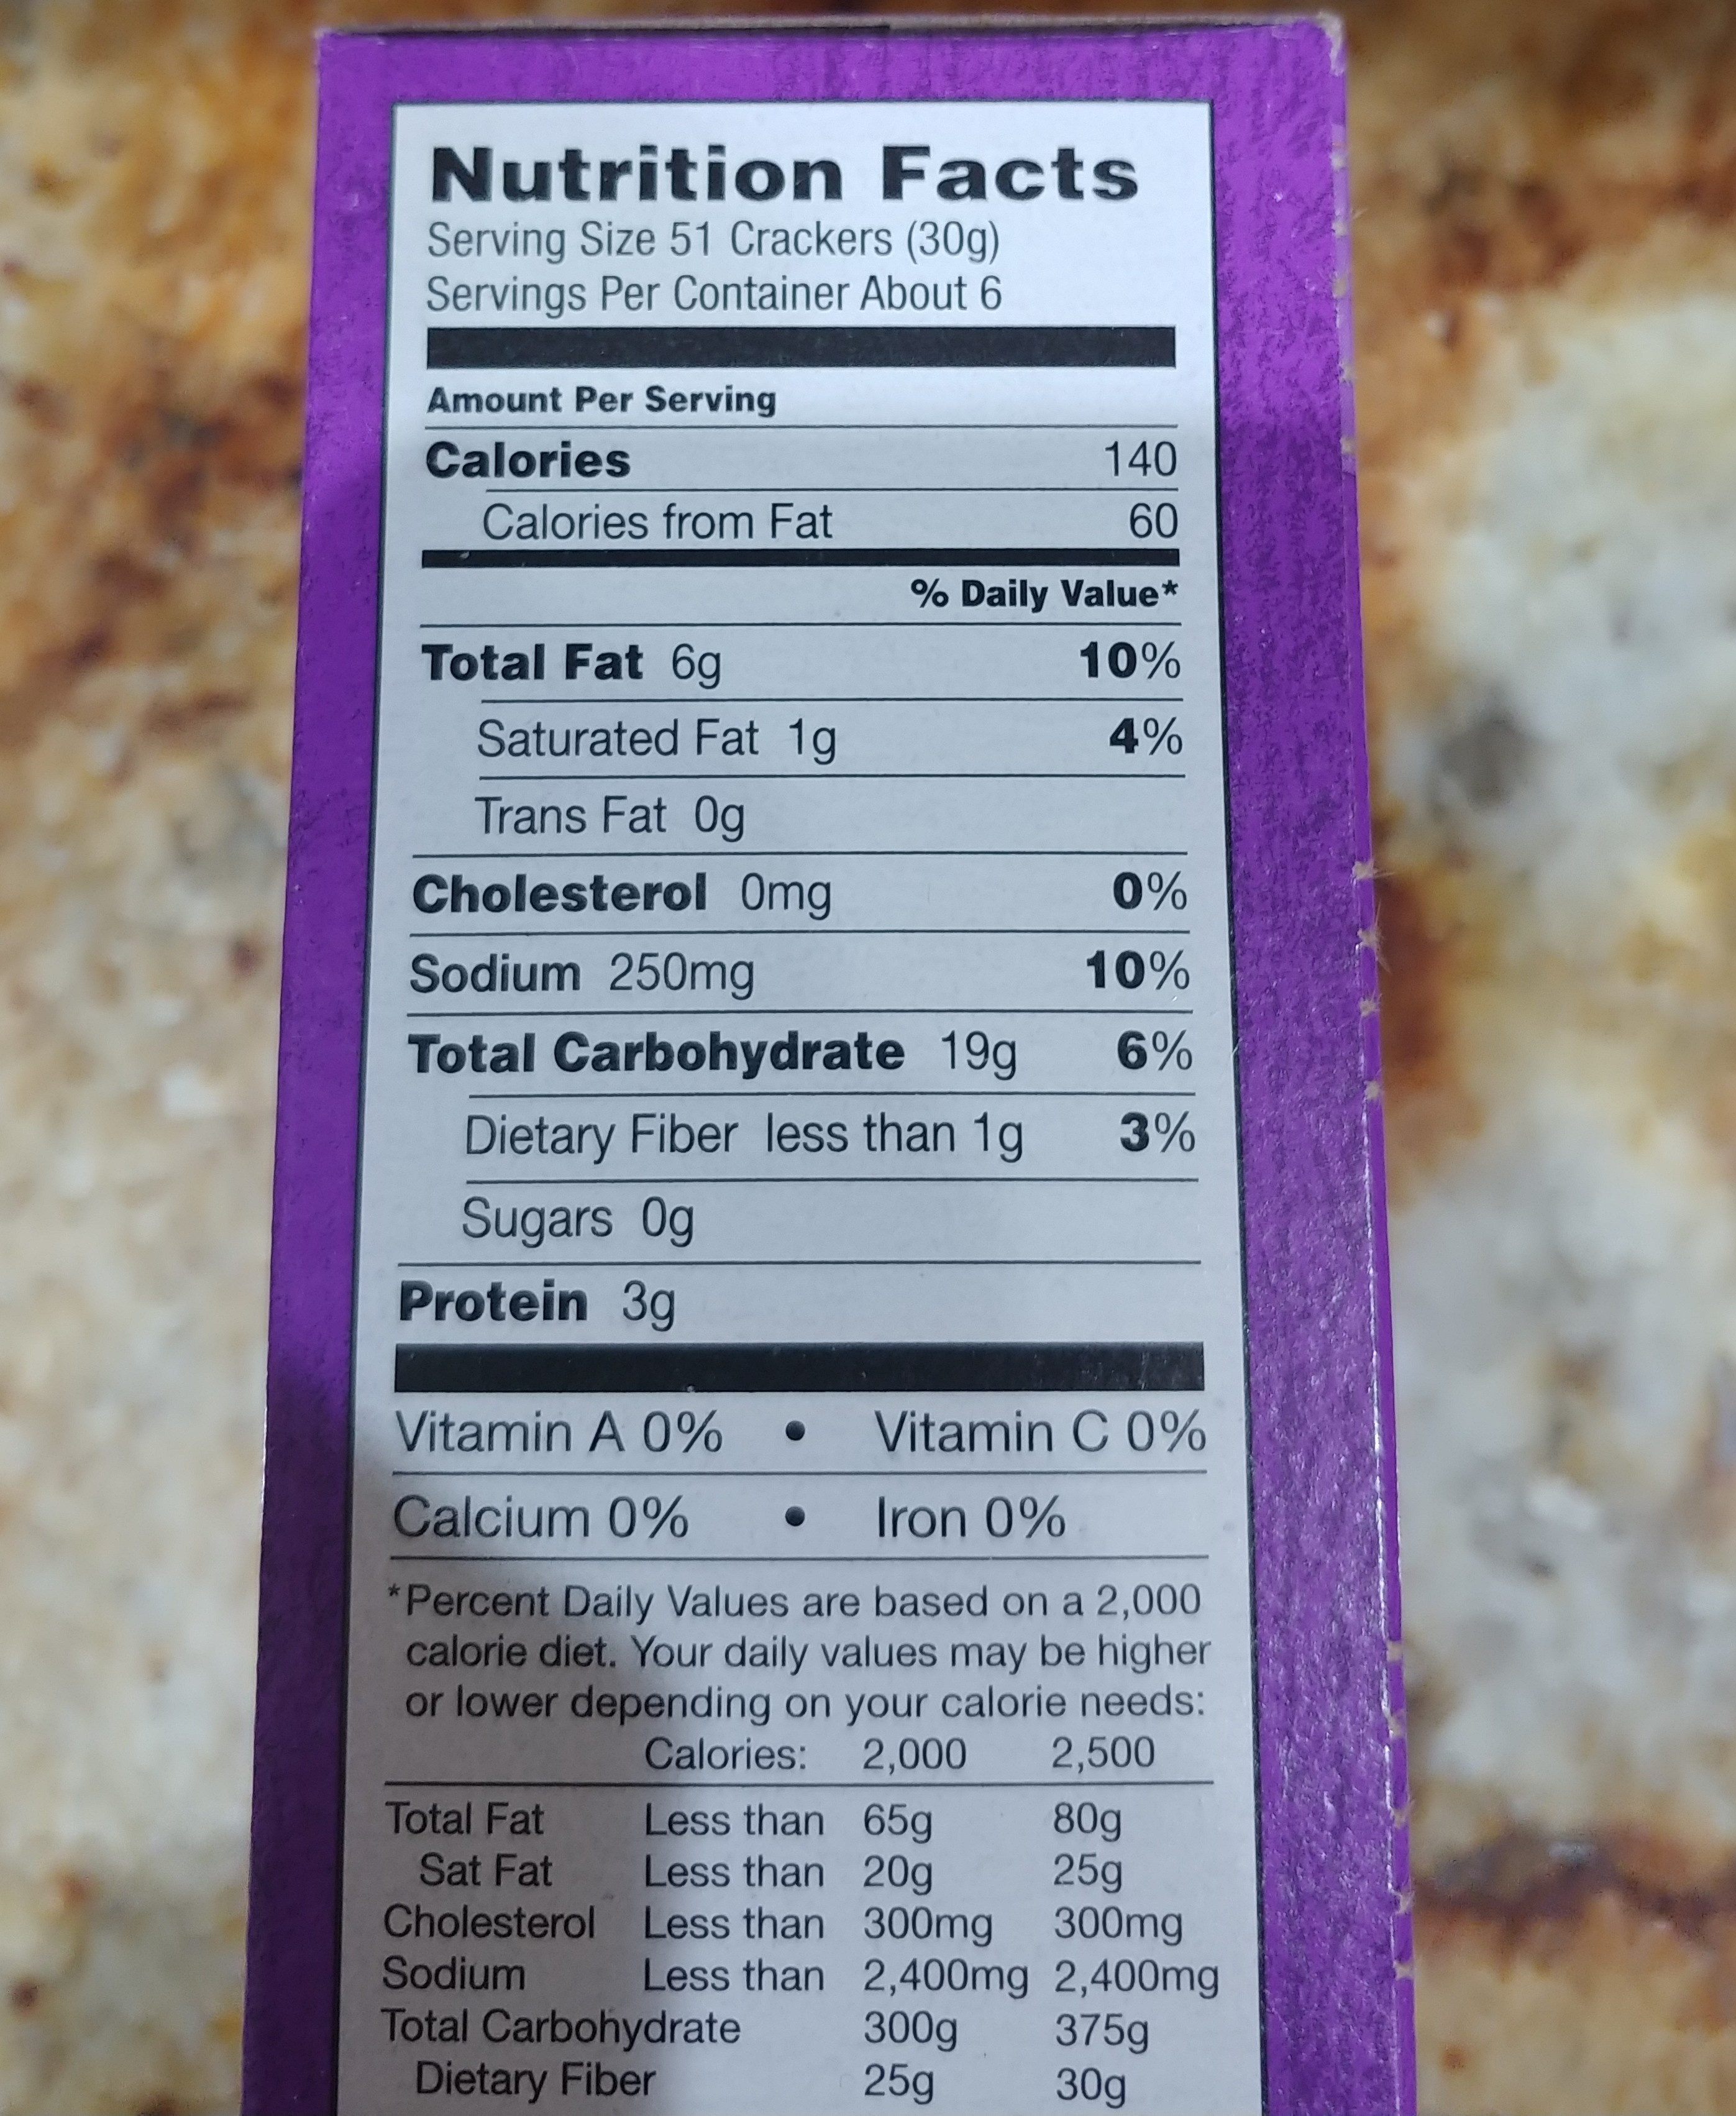 Annies hmgrwn org chdr bunnies bkd snck crackers - Nutrition facts